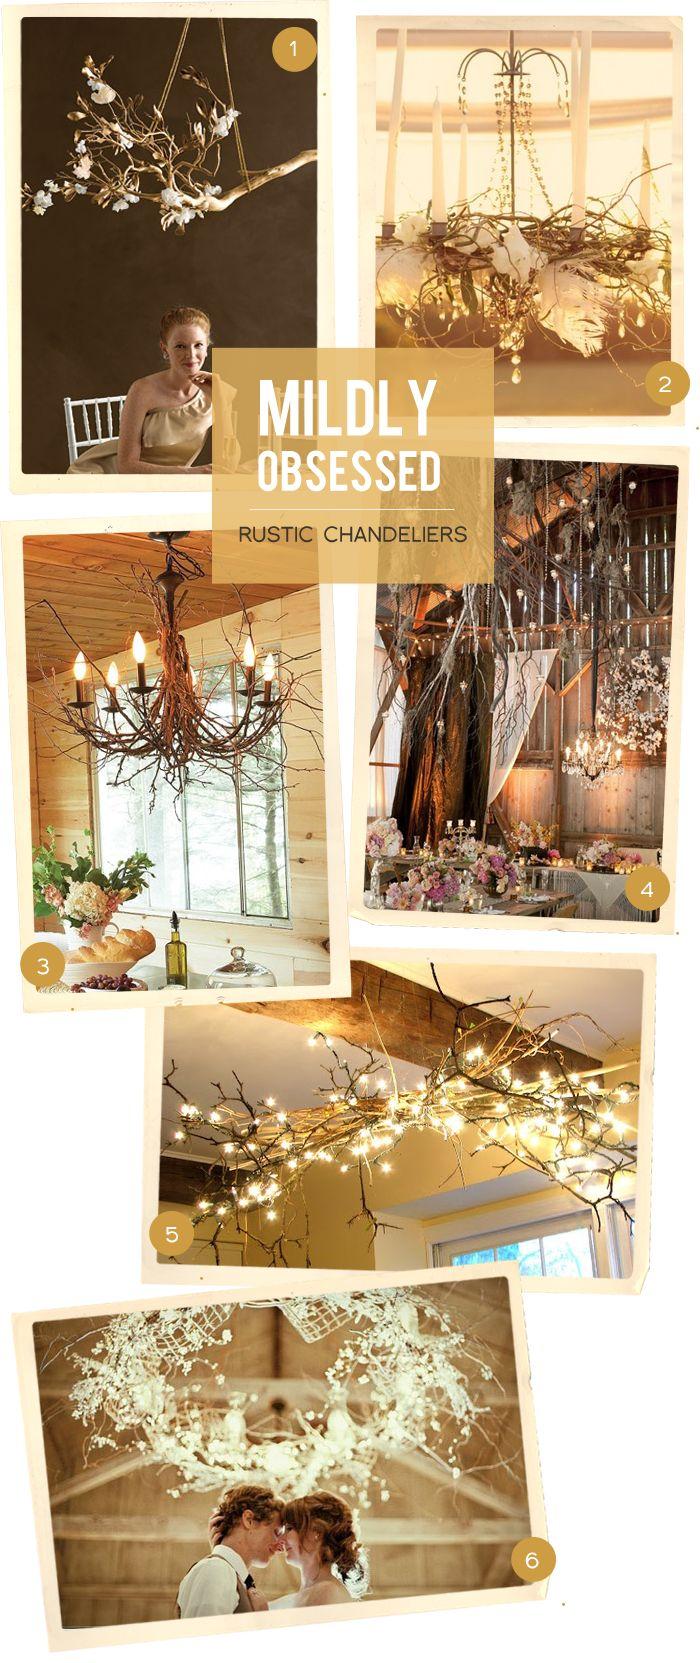 Hochzeit - Mildly Obsessed/Rustic Chandeliers.